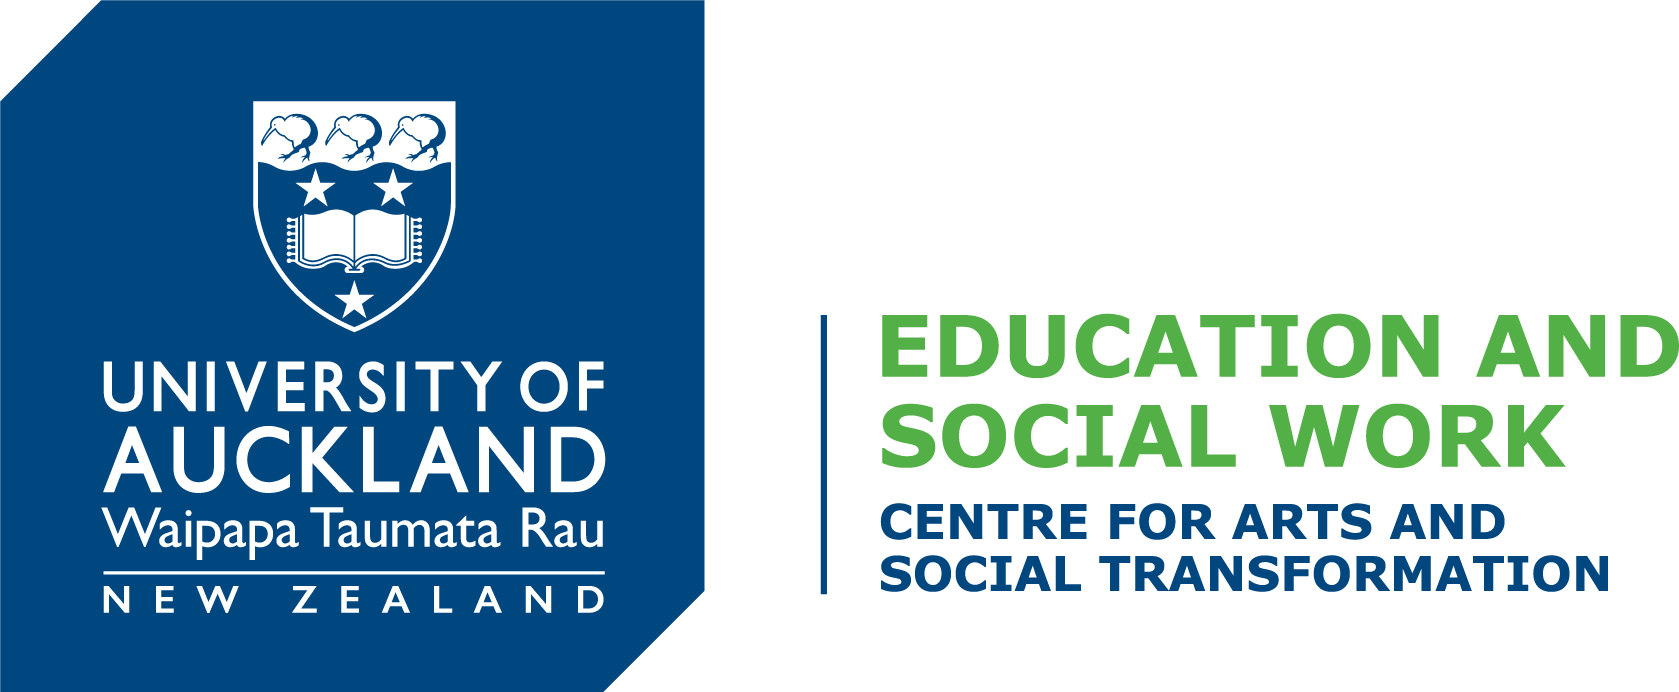 Centre for Arts and Social Transformation